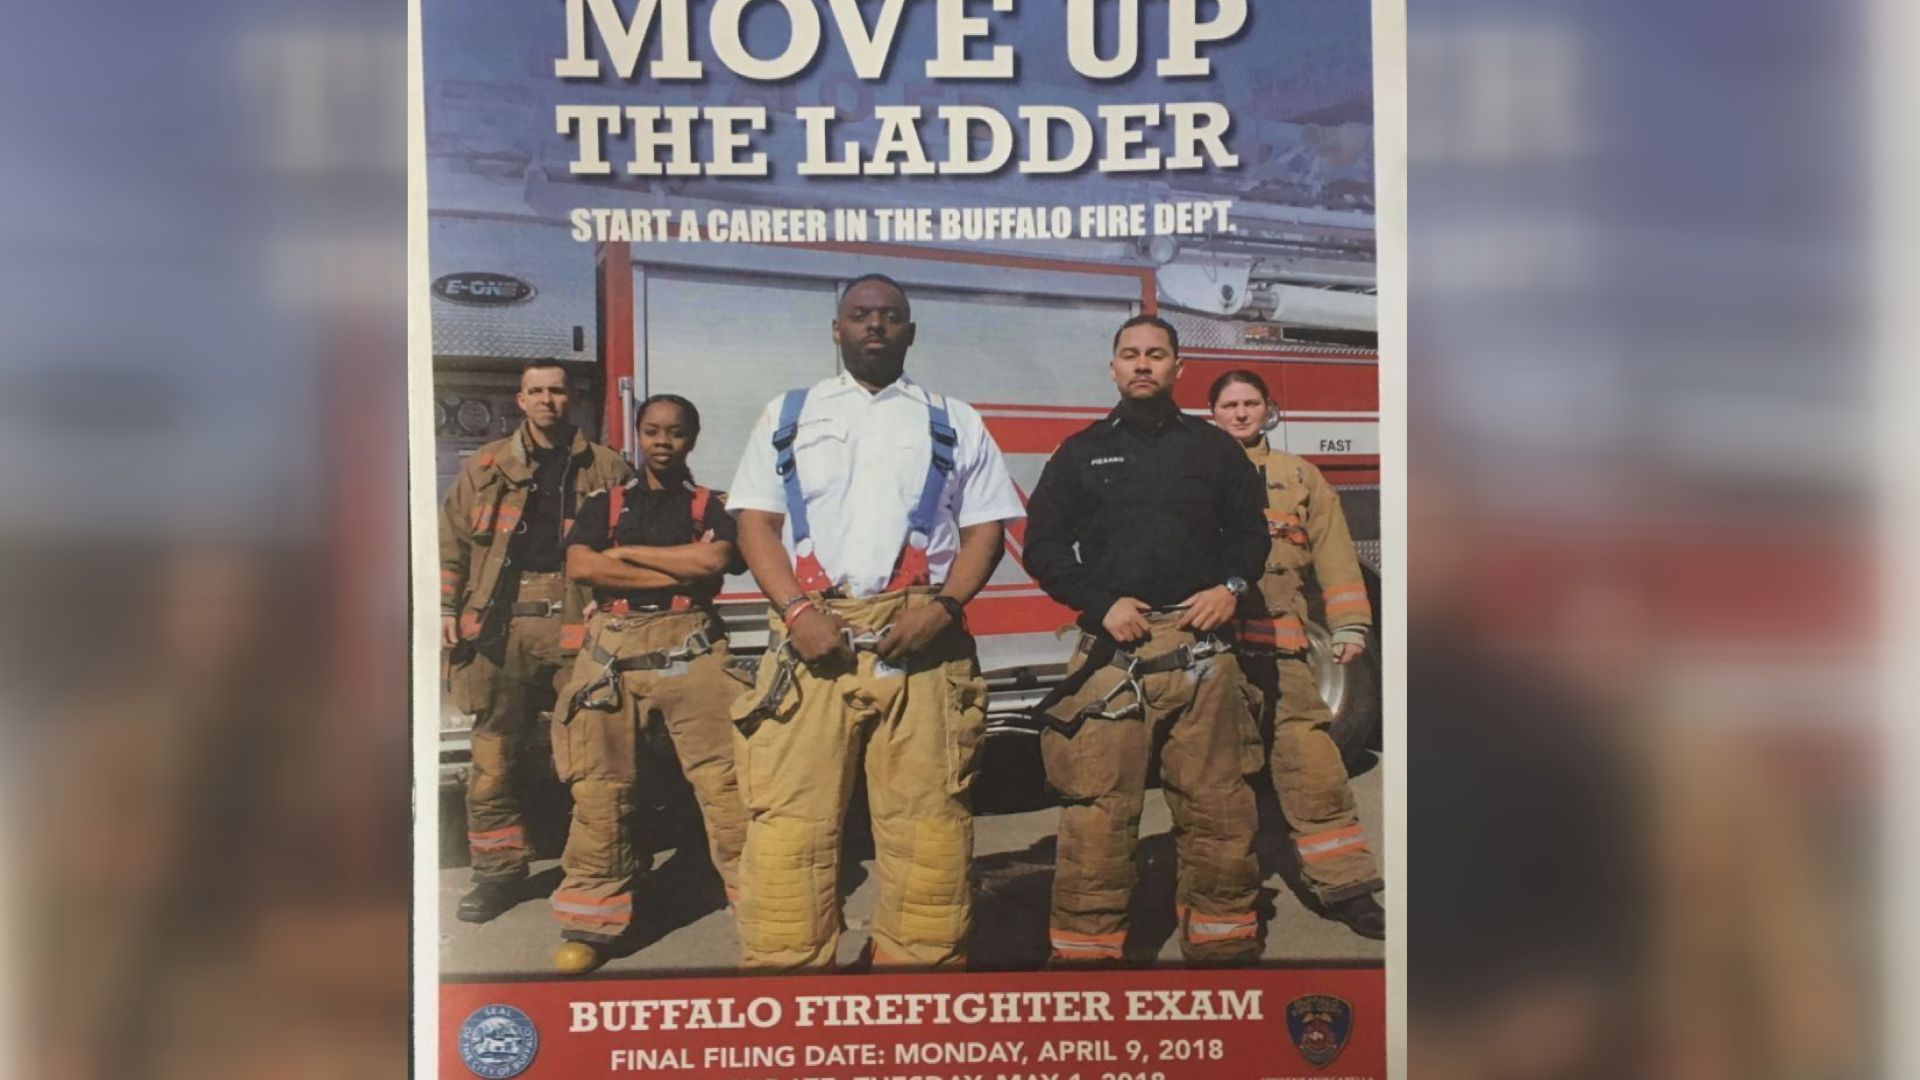 Buffalo Firefighter exam announced for May